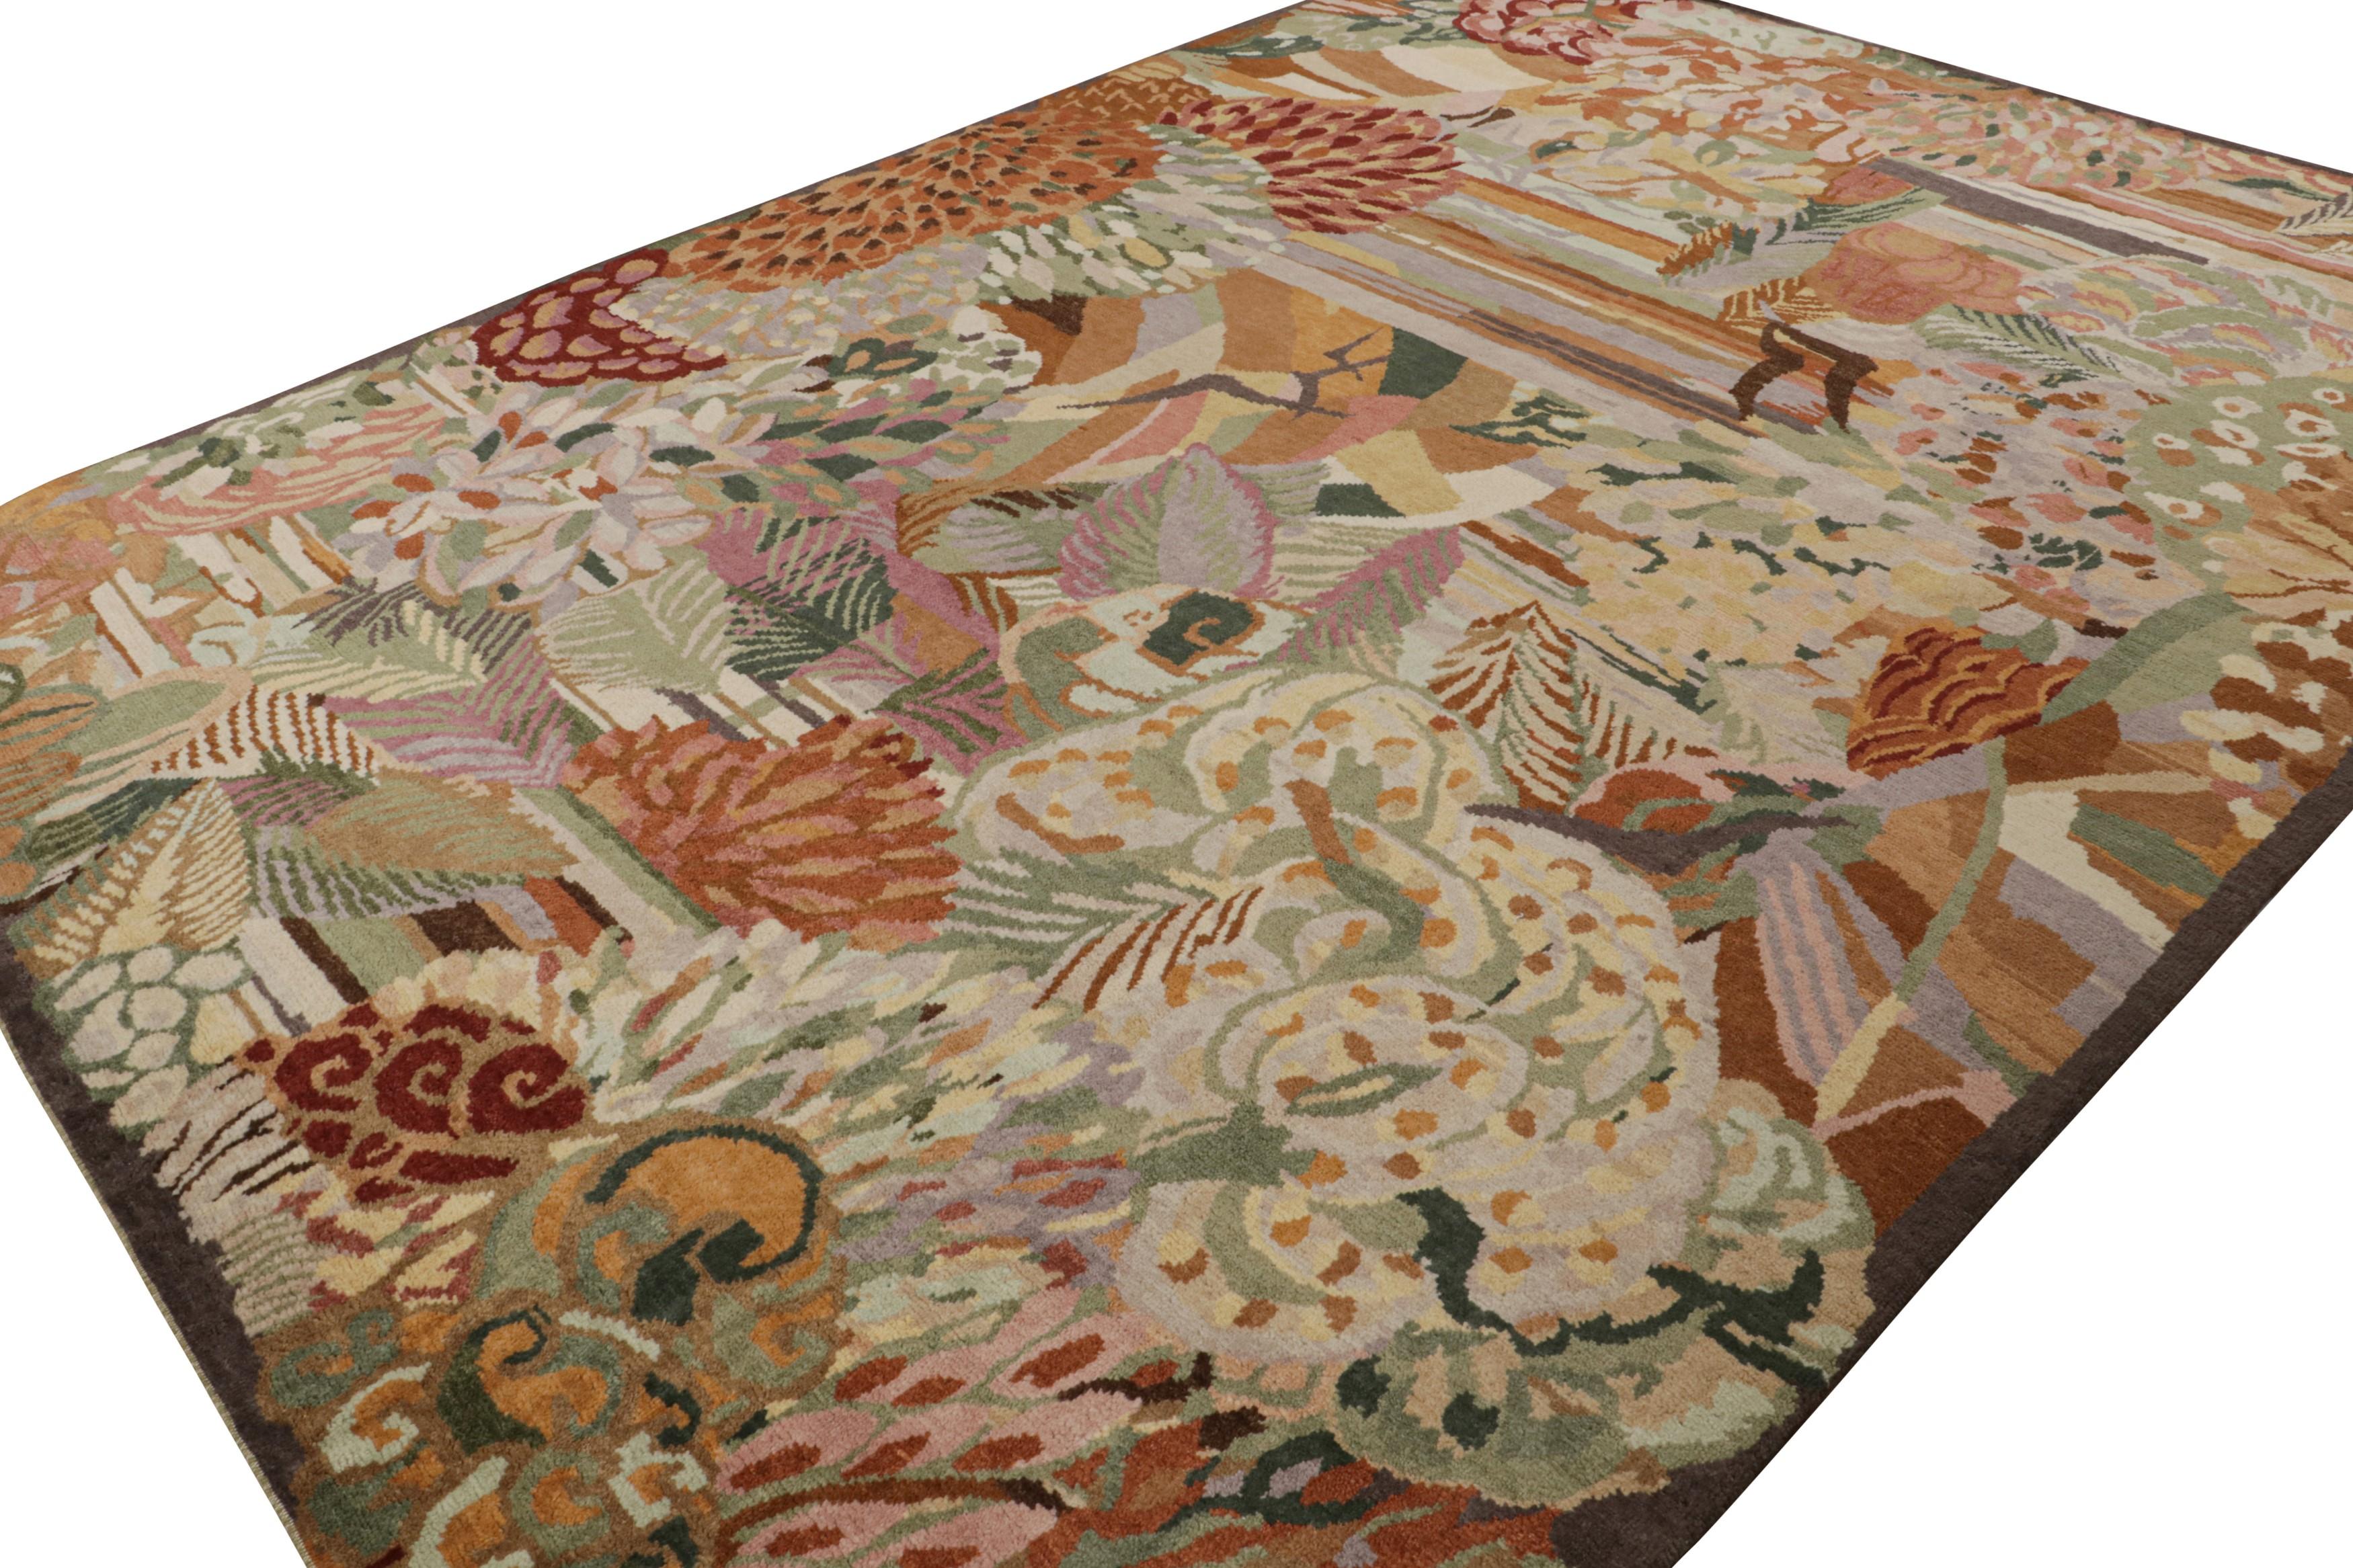 This 10x14 ode to French Art Deco rugs is the next addition to Rug & Kilim’s newly inspired Deco Collection. Hand-knotted in wool.

On the Design:  

This piece boasts the Deco style of the 1920s with luscious polychromatic florals in prevailing